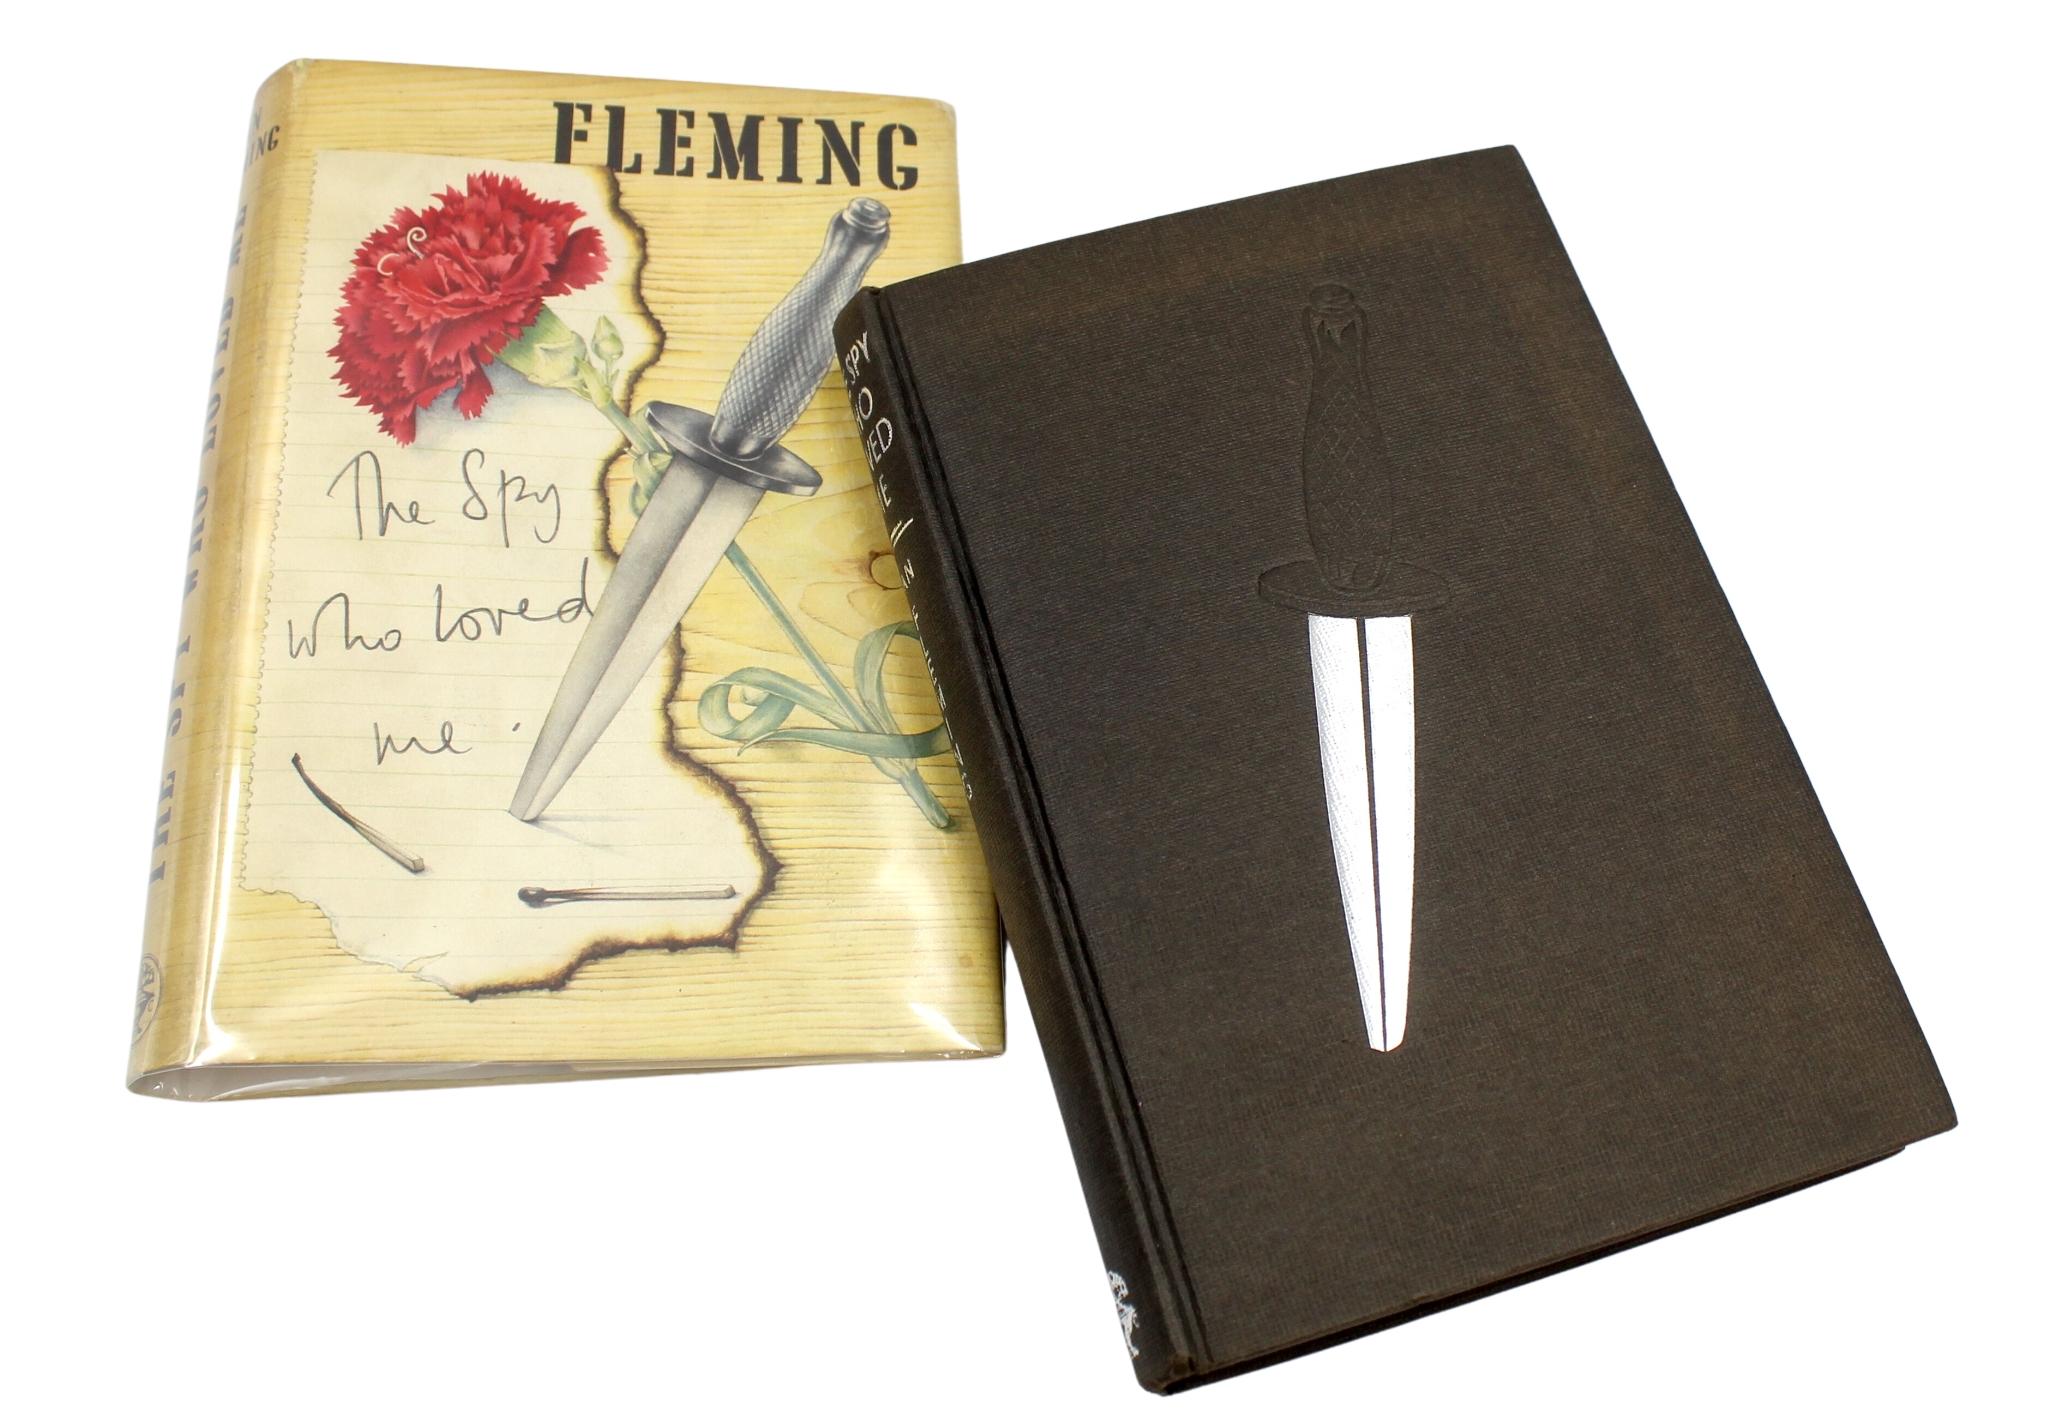 The Spy Who Loved Me by Ian Fleming, First Edition in Original Dust Jacket, 1962 For Sale 4